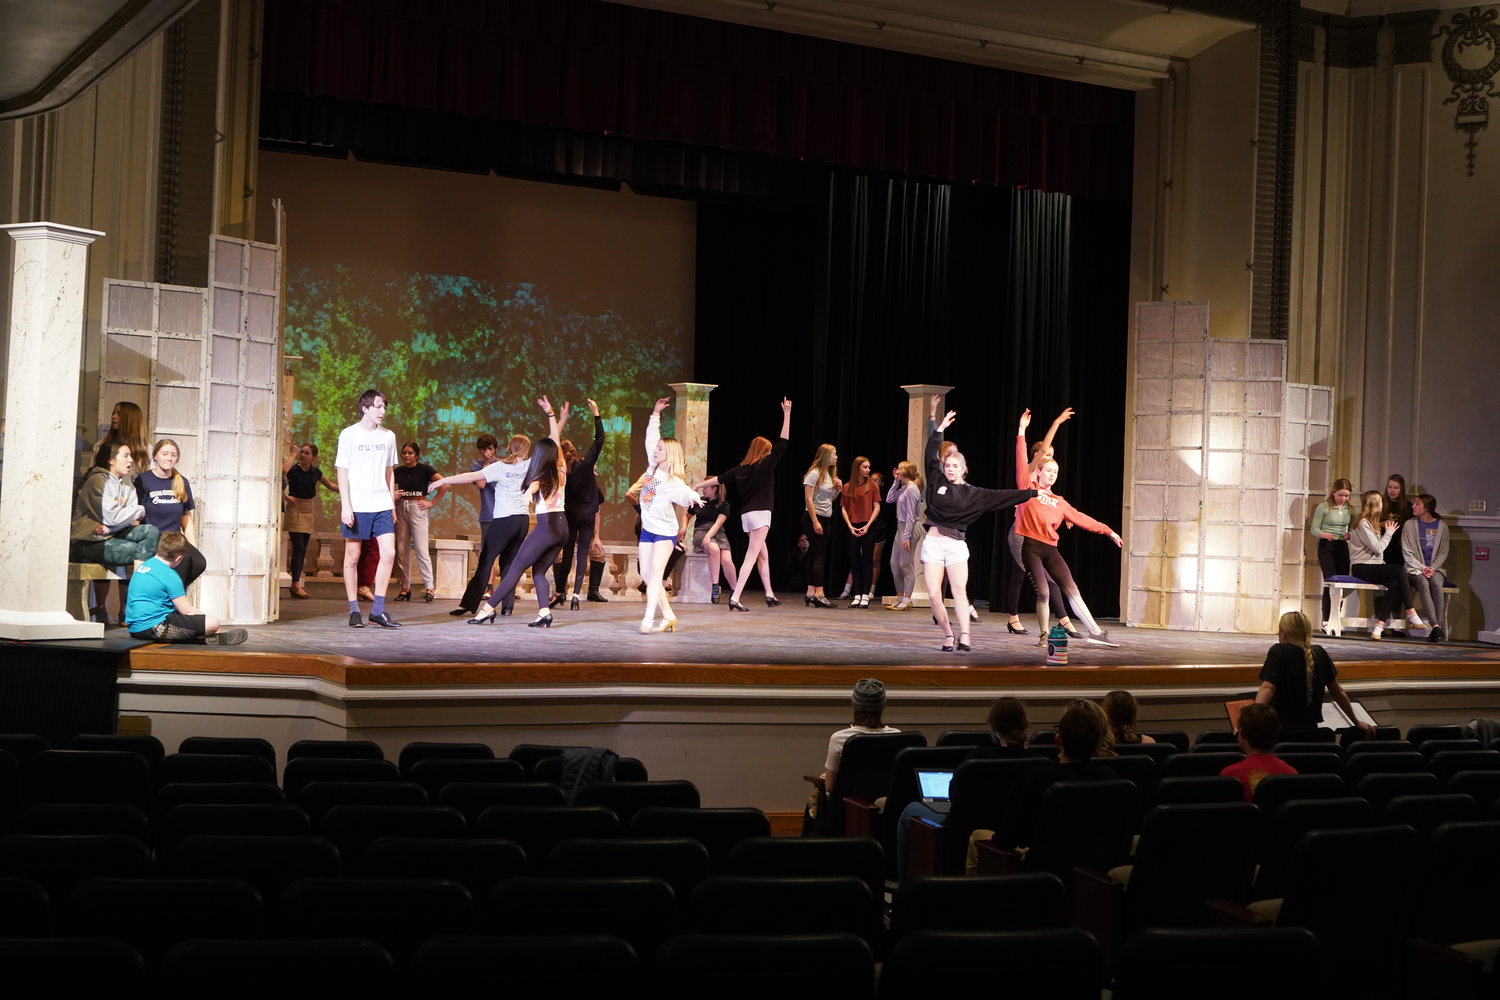 Members of the cast of Helias Catholic High School’s spring musical production of “Anastasia” rehearse a singing and dancing number on the stage of the Miller Performing Arts Center in Jefferson City on March 1.